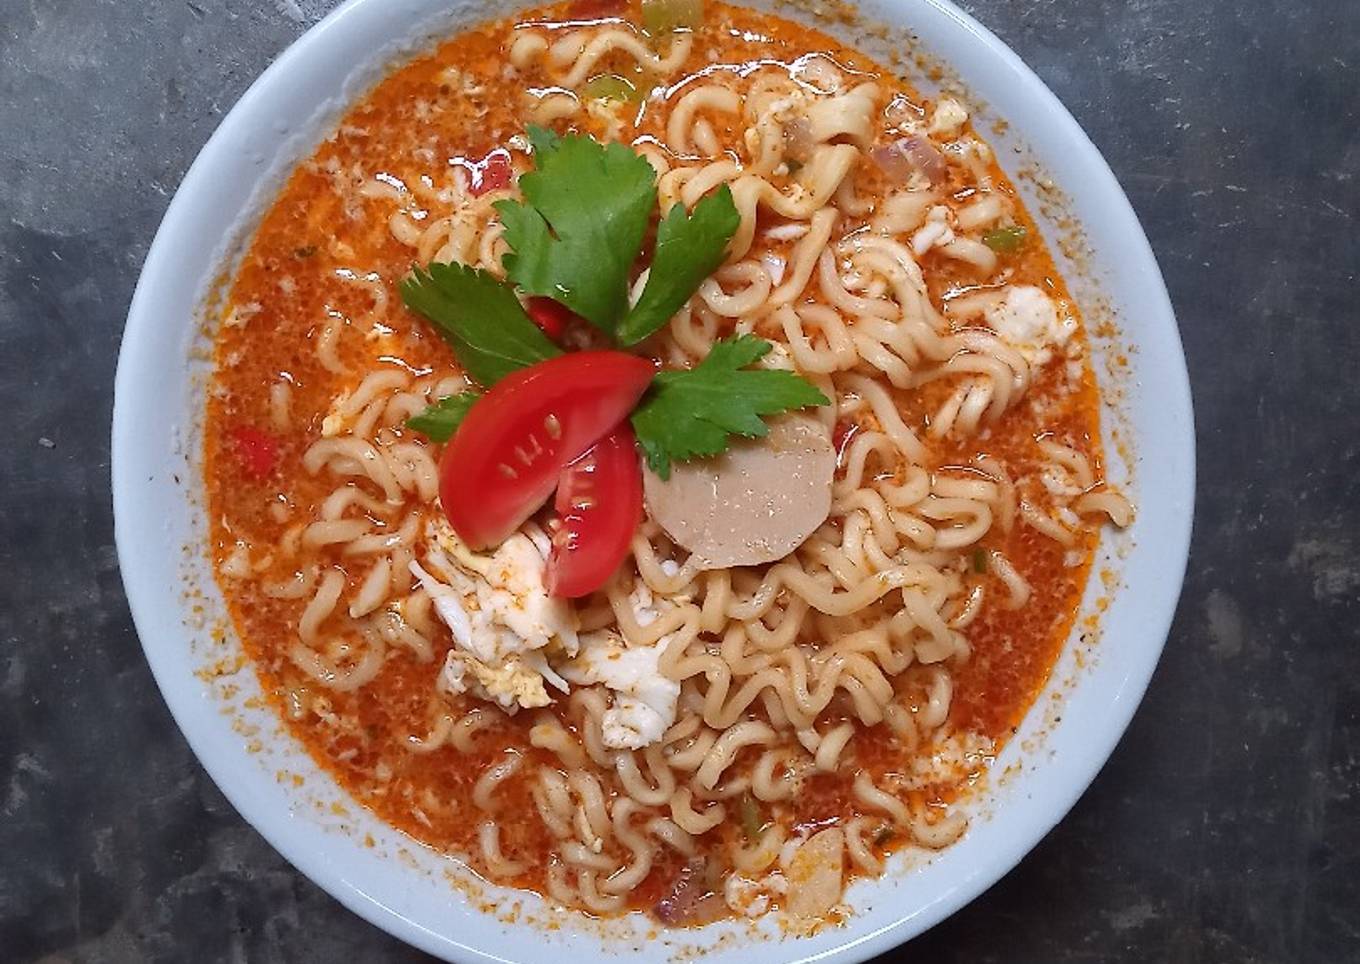 Mie kuah (Korean Spicy Soup)